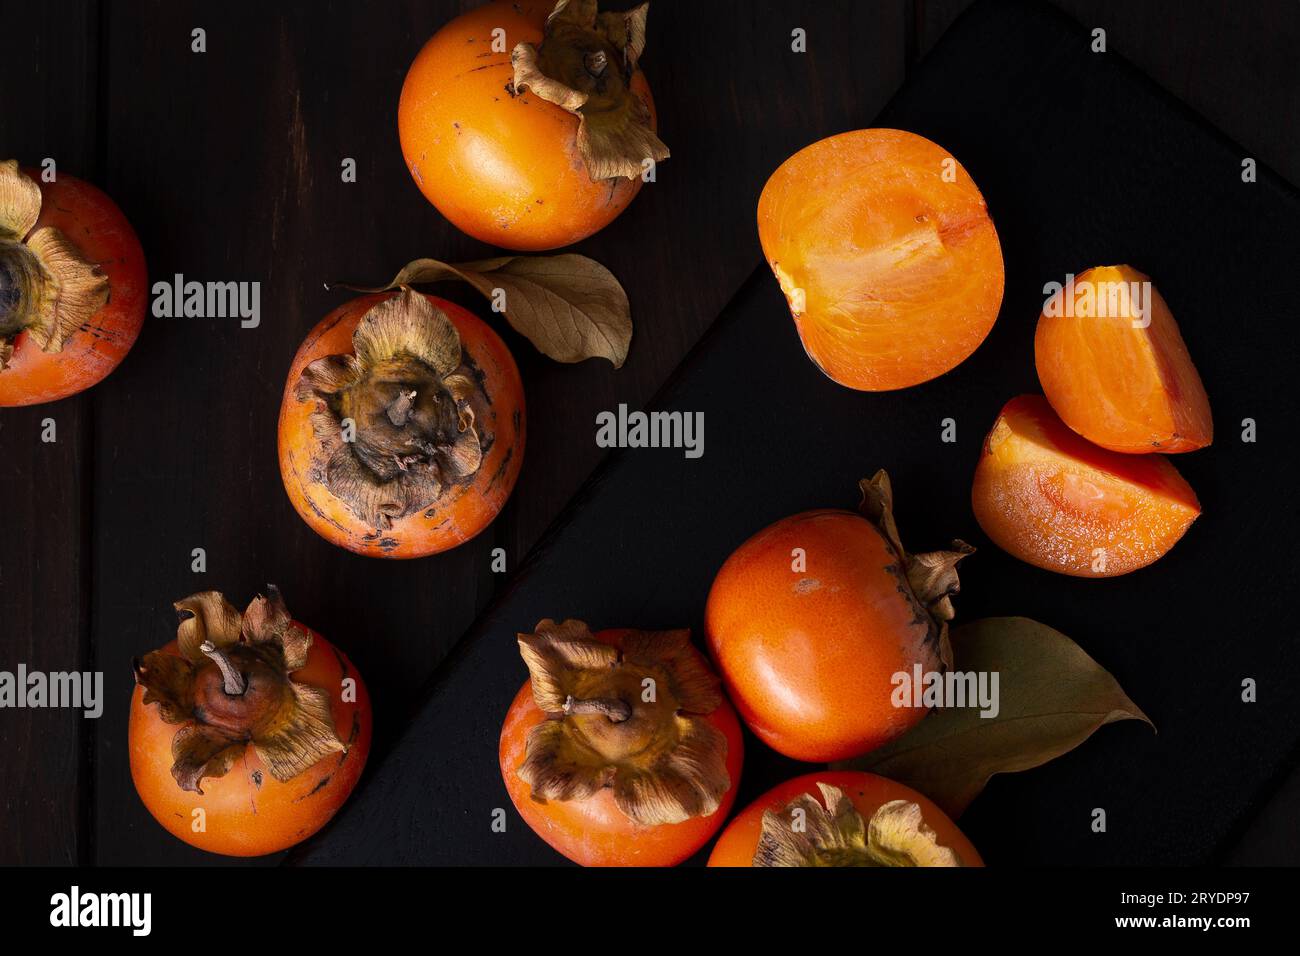 Persimmon still life in low key Stock Photo